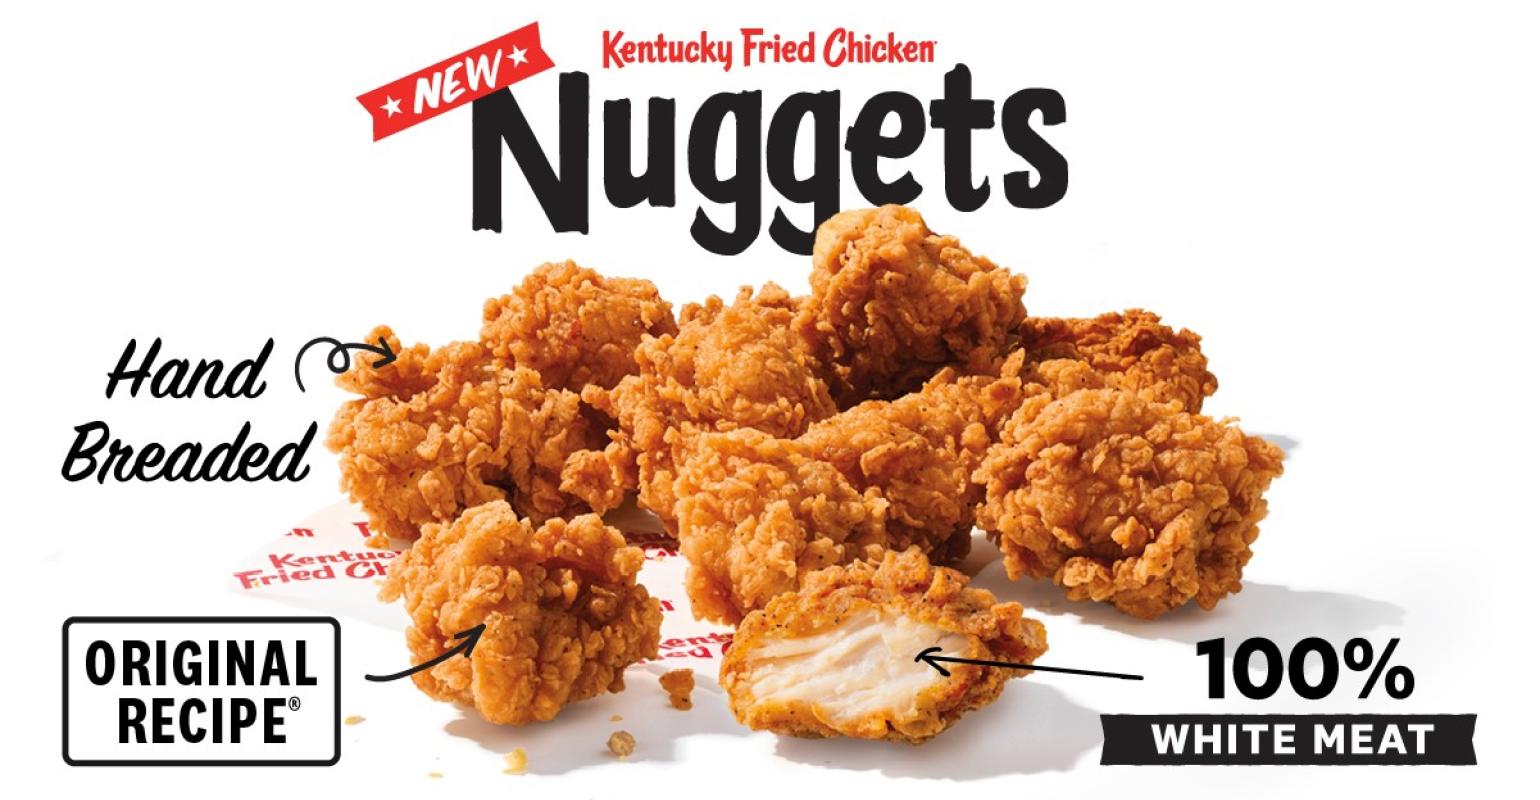 KFC is finally introducing chicken nuggets nationally | Nation's Restaurant  News